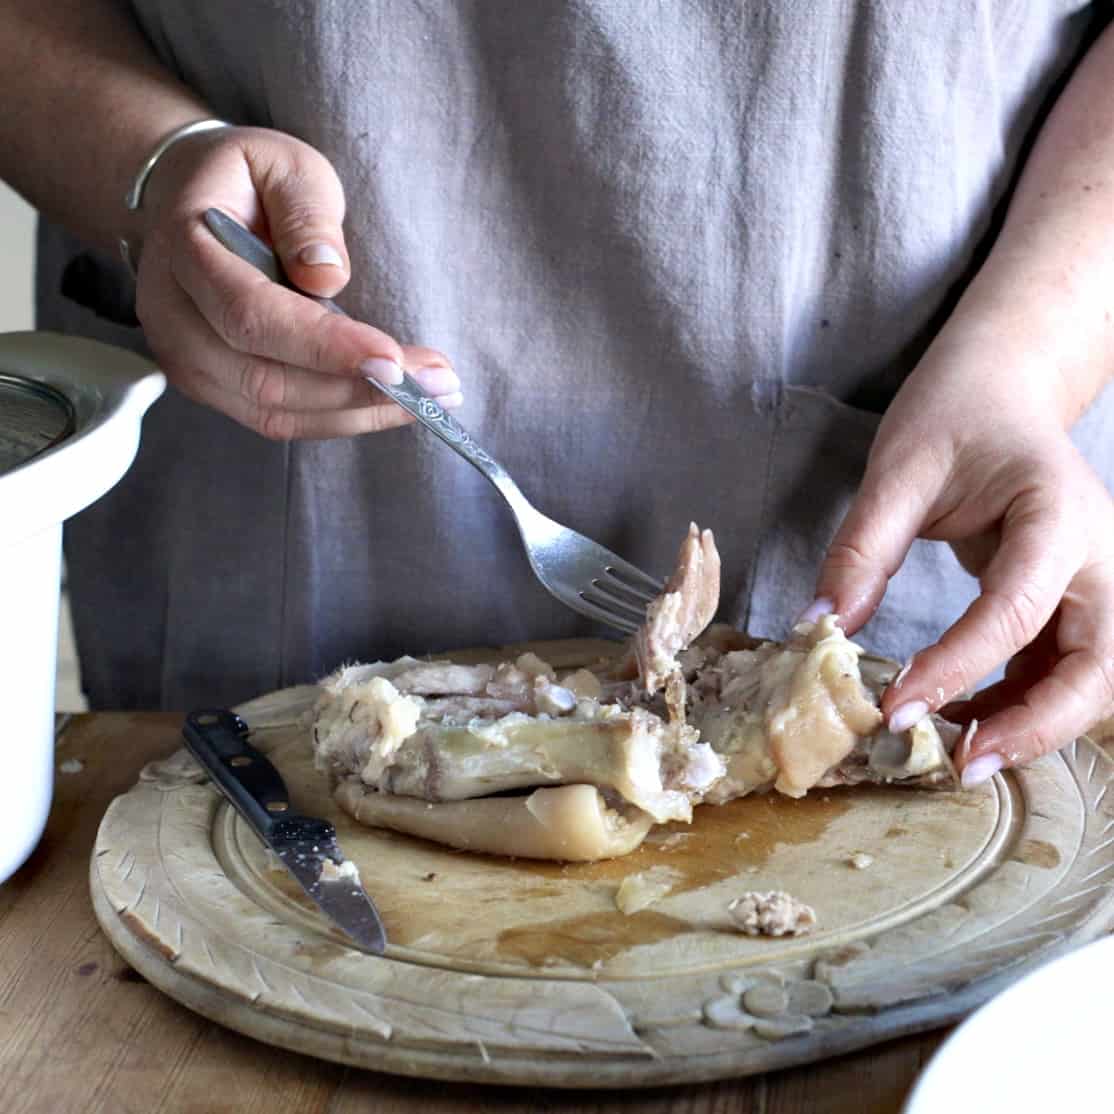 Woman removing the meat from inside a cooked pigs foot using a silver fork